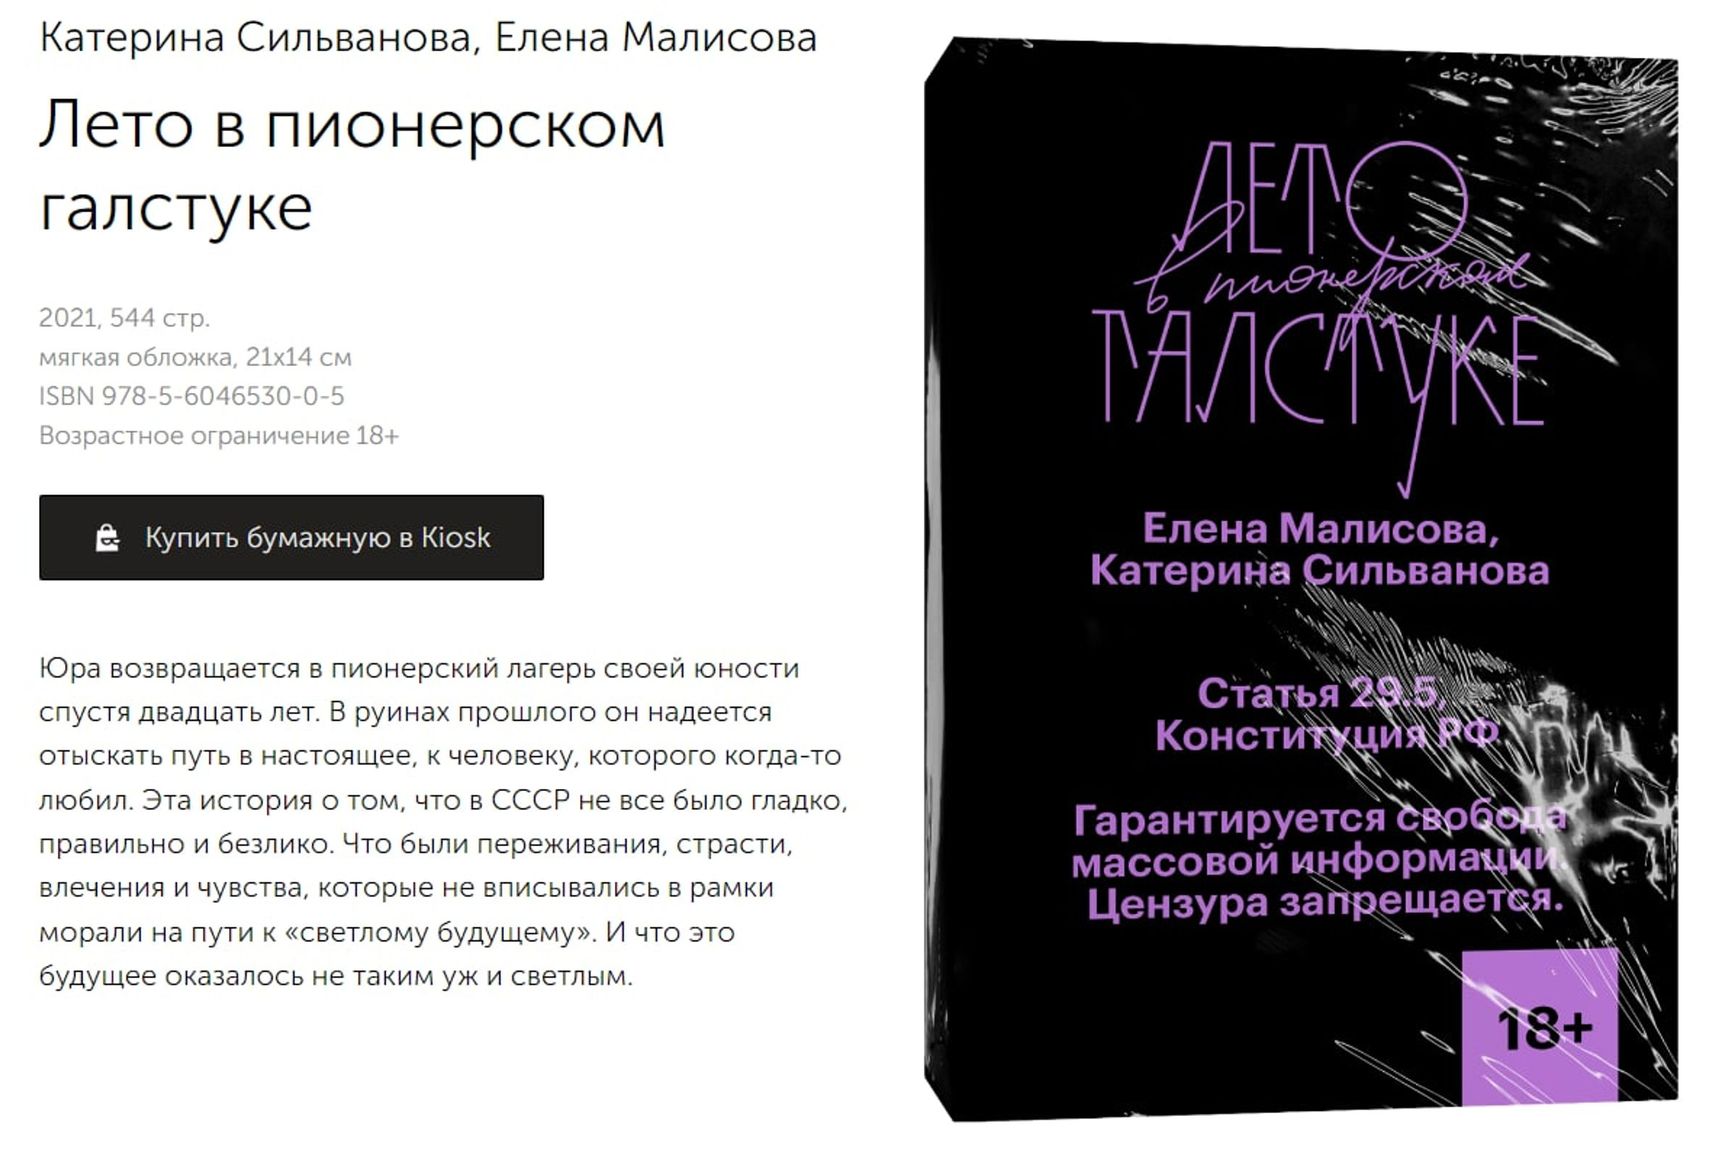 In an act of protest against censorship, Popcorn Books has chosen to display Article 29.5 of the Russian Constitution, which prohibits censorship in Russia, on the cover of books that discuss same-sex relationships. 